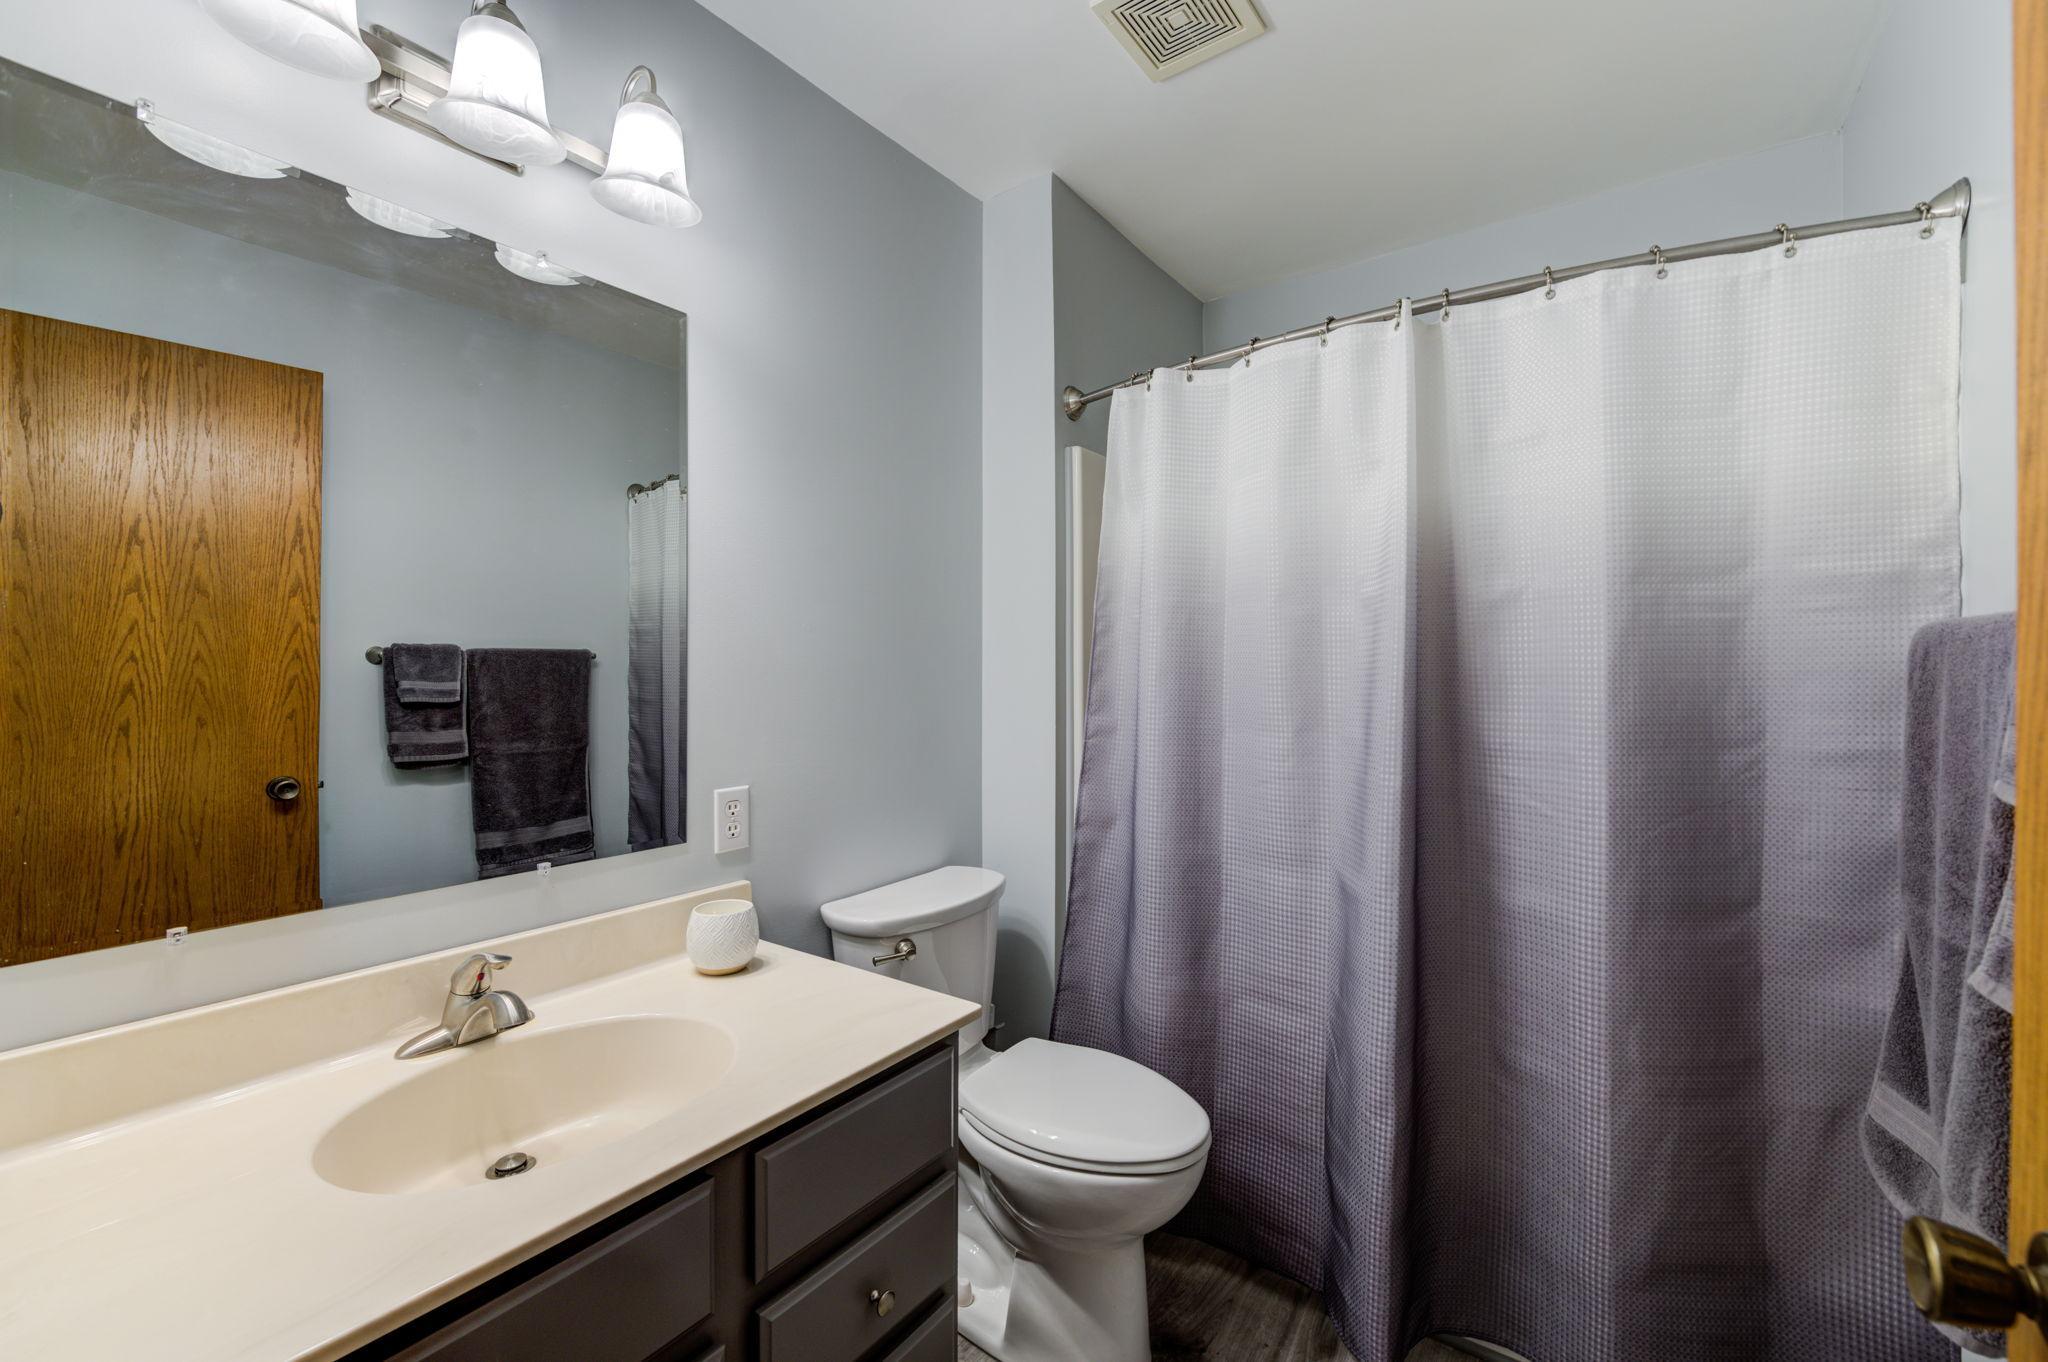 Across from the upper-level bedrooms is a full bath that has been updated with vinyl plank flooring.